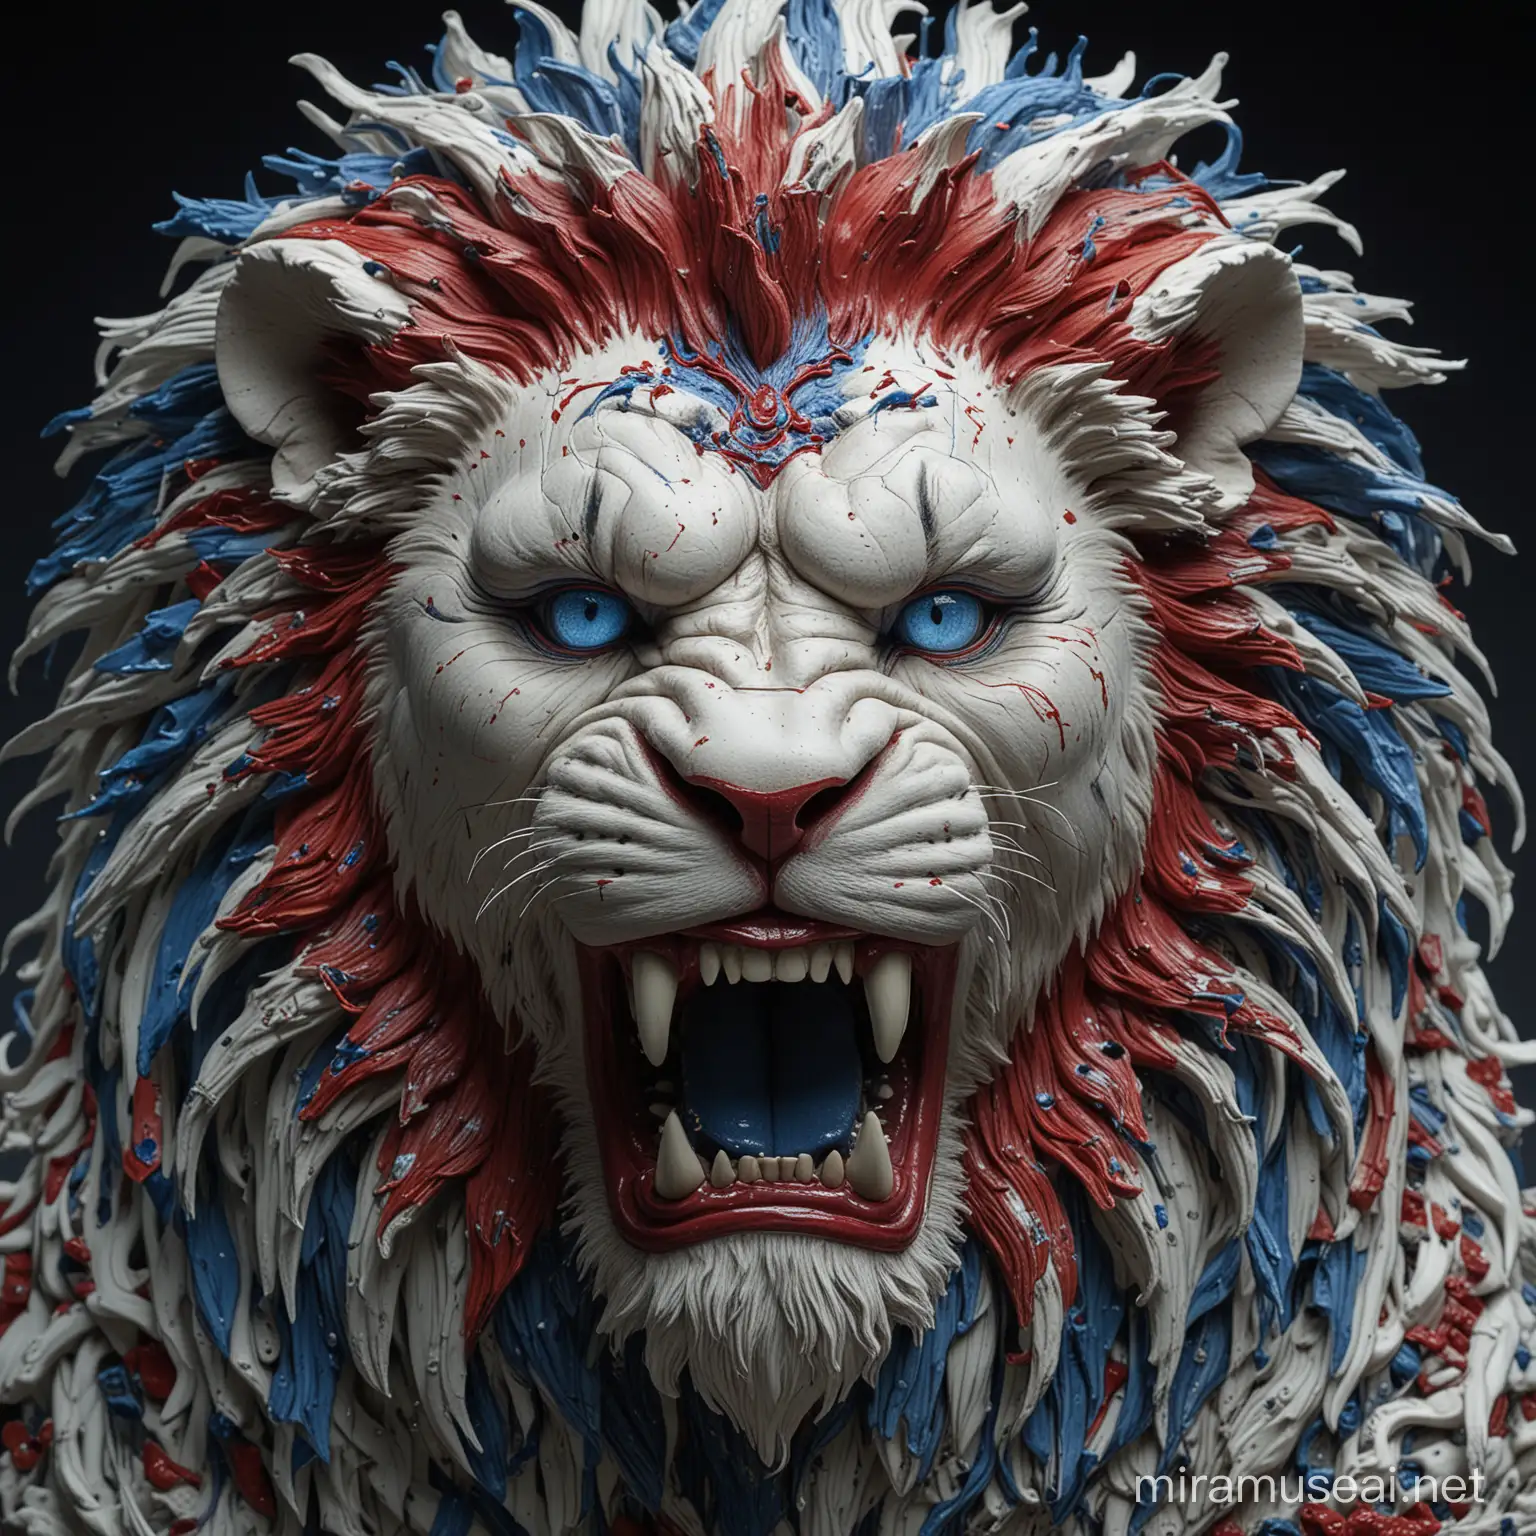 ALGORITHMIC FUSION, An angry Lion  made of porcelain white and blue and red is preparing to attack, in its natural habitat, extremely-realistic, extremely detailed face, style by Dan Winters, Russell James, Steve McCurry, centered, extremely detailed, Canon 5D Mark IV with Kodak Ektar film, full fram, award winning photography